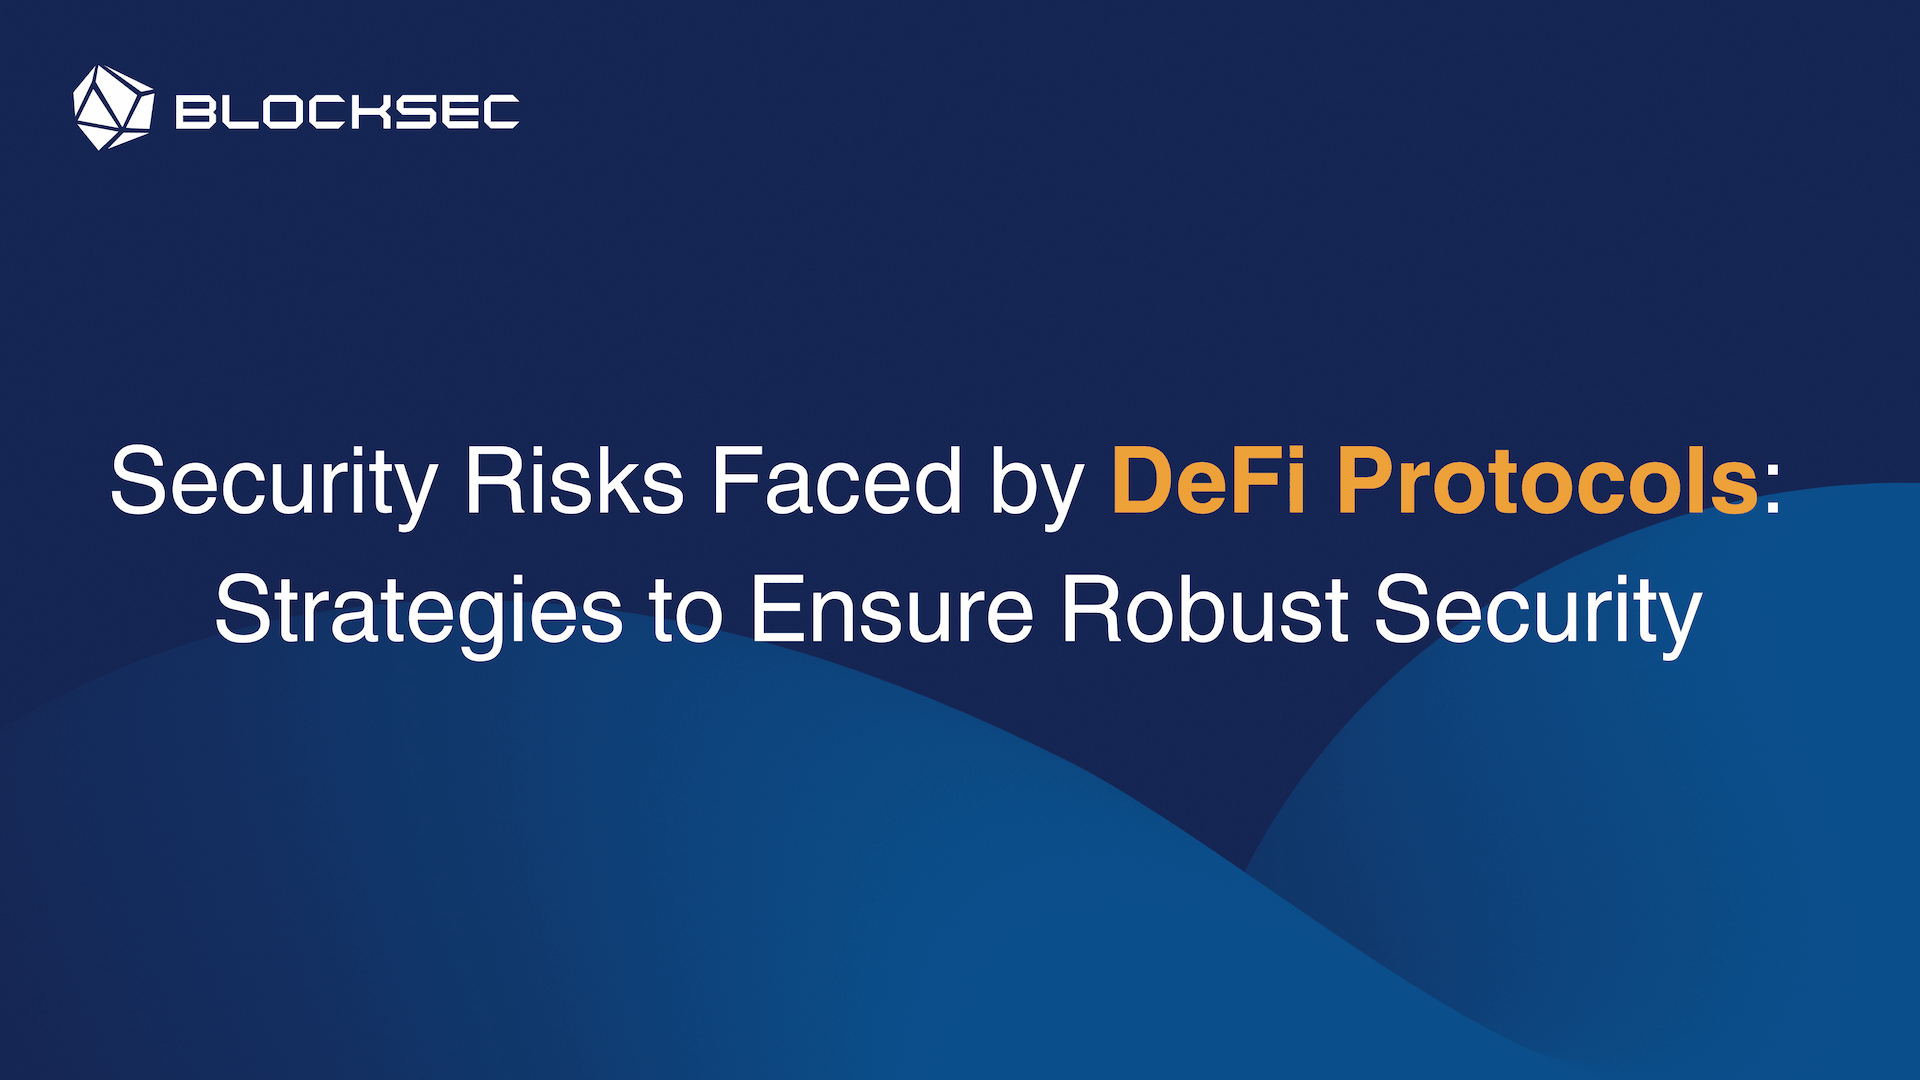 What Are the Security Risks Faced by DeFi Protocols and How to Ensure Protocol Security?